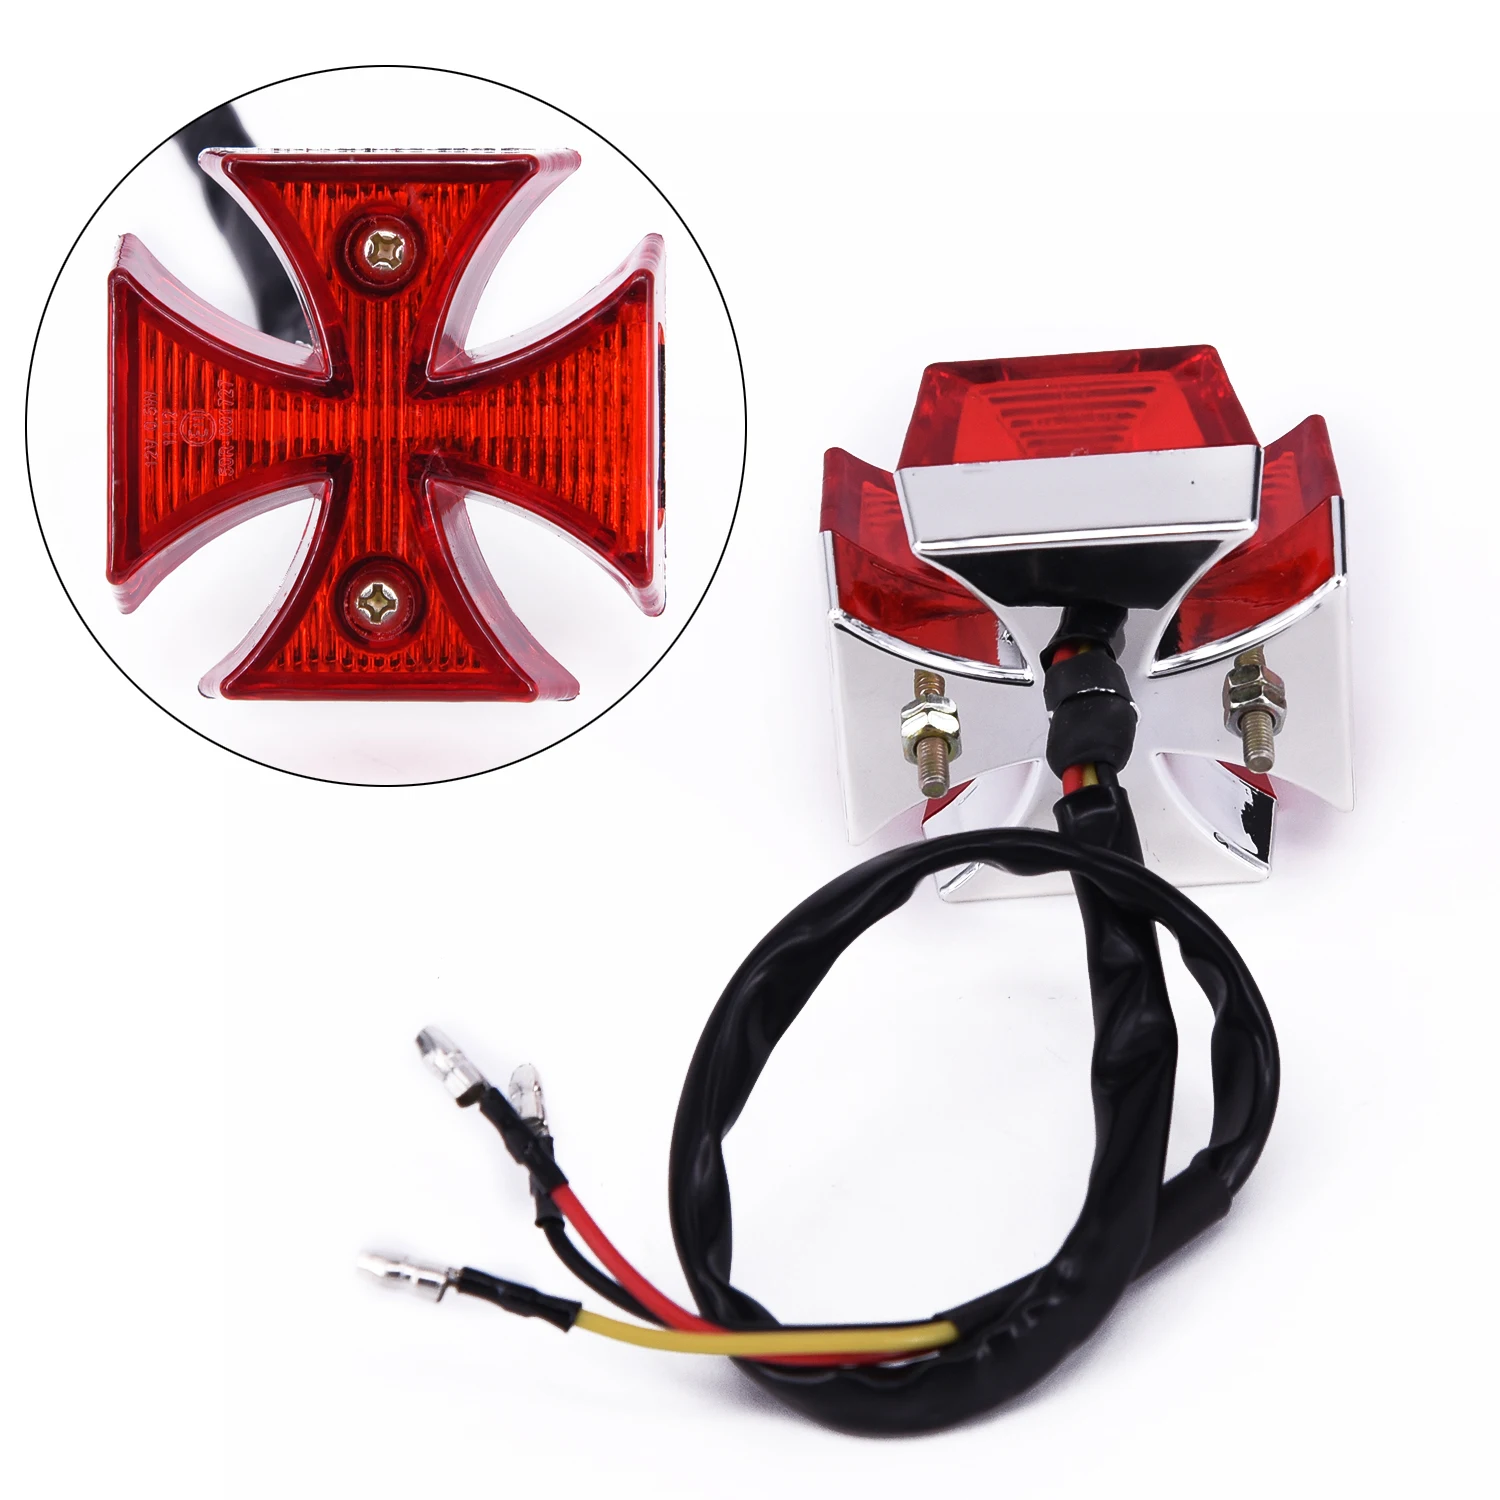 Motorcycle Tail Light - Distinctive Maltese Cross Design, Universal Fit for Ch - £10.20 GBP